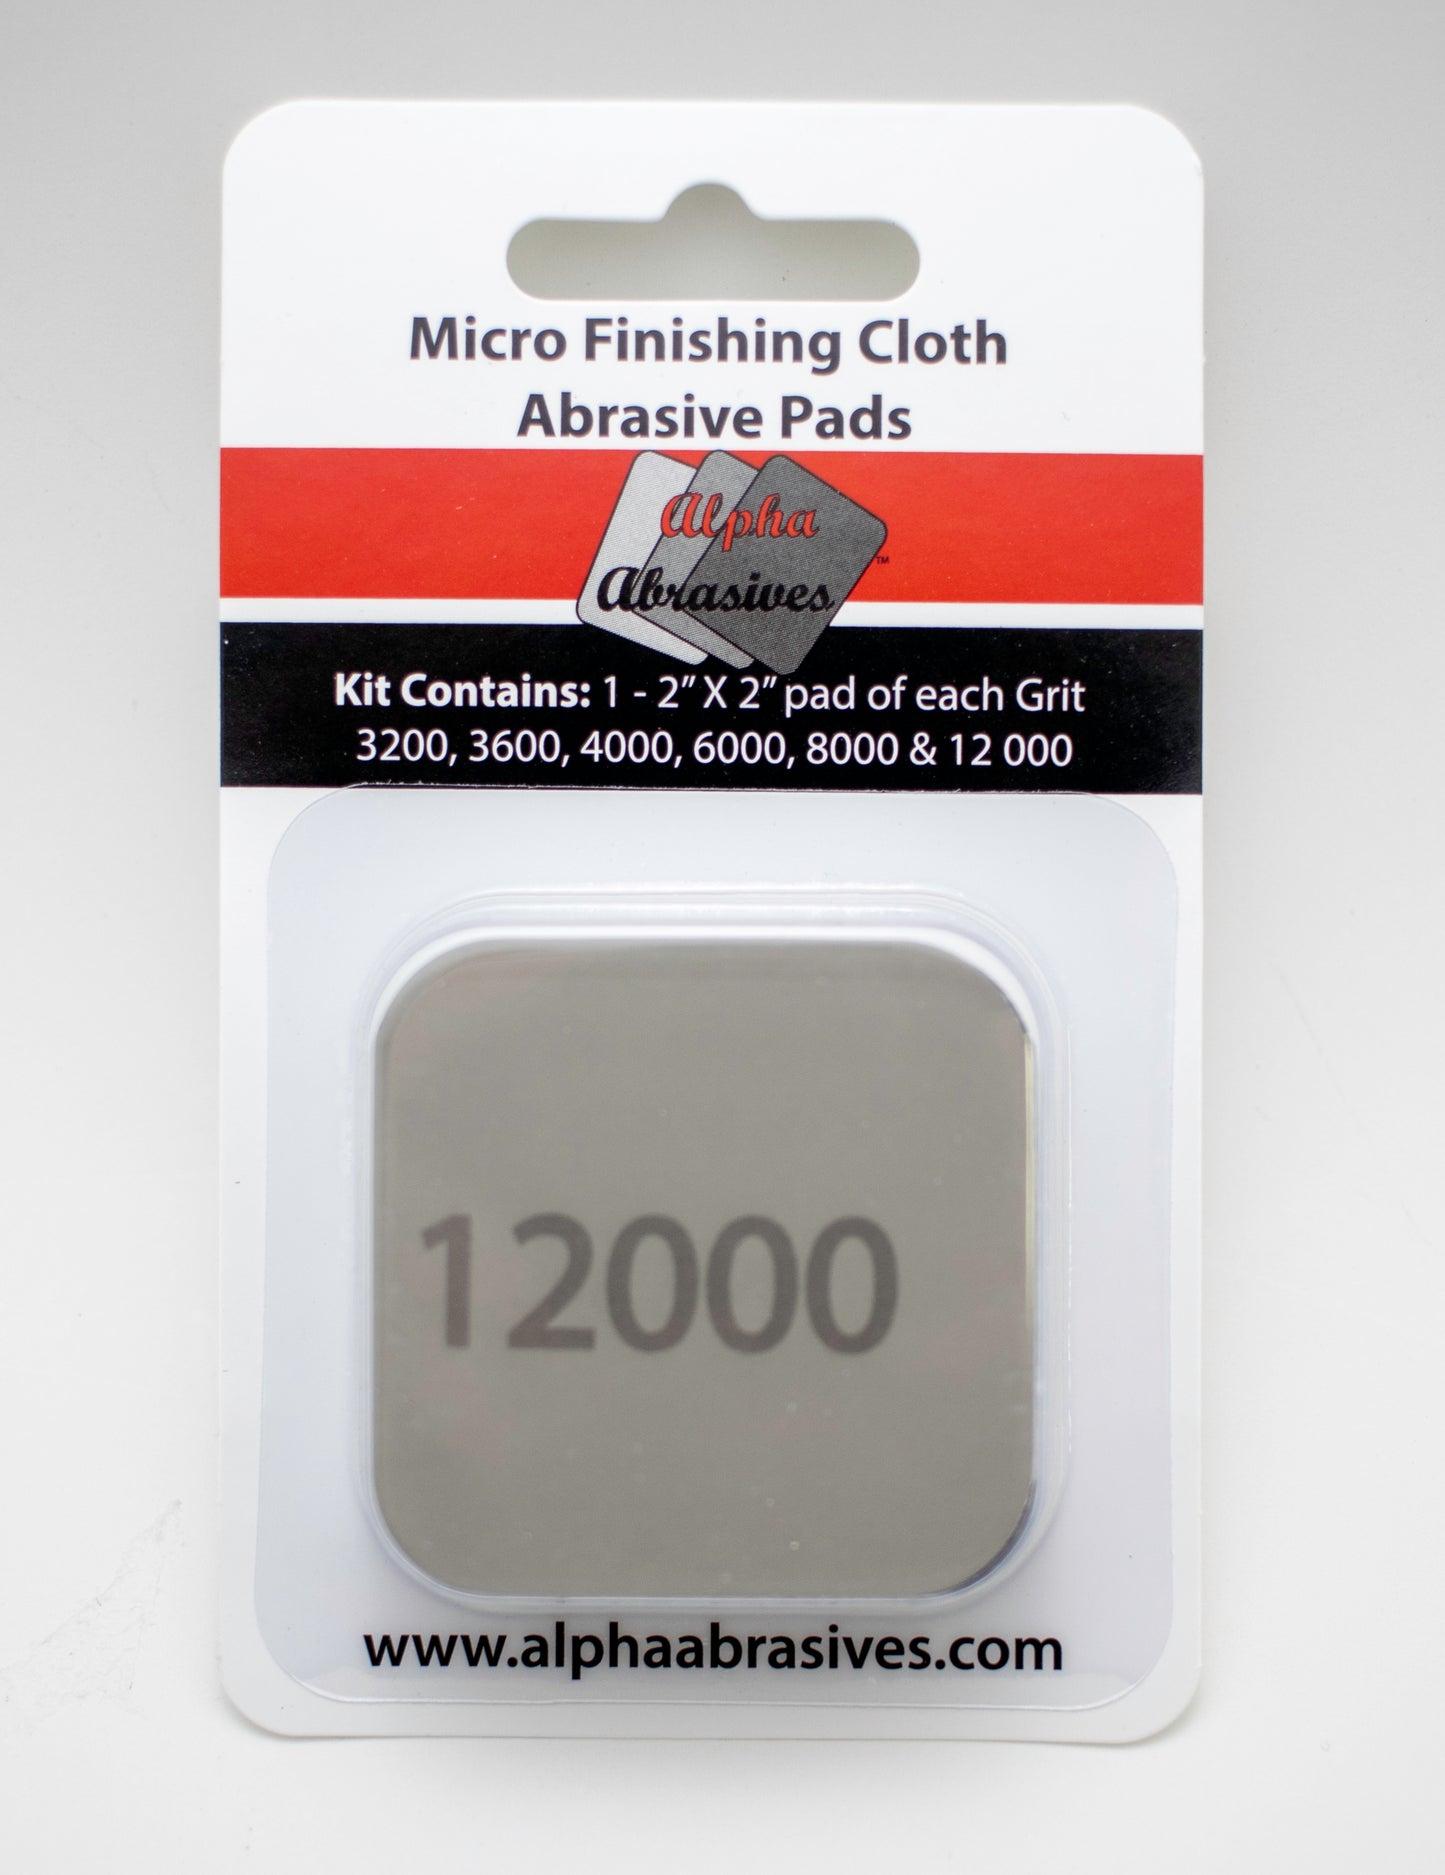 Micro Finishing Cloth Products